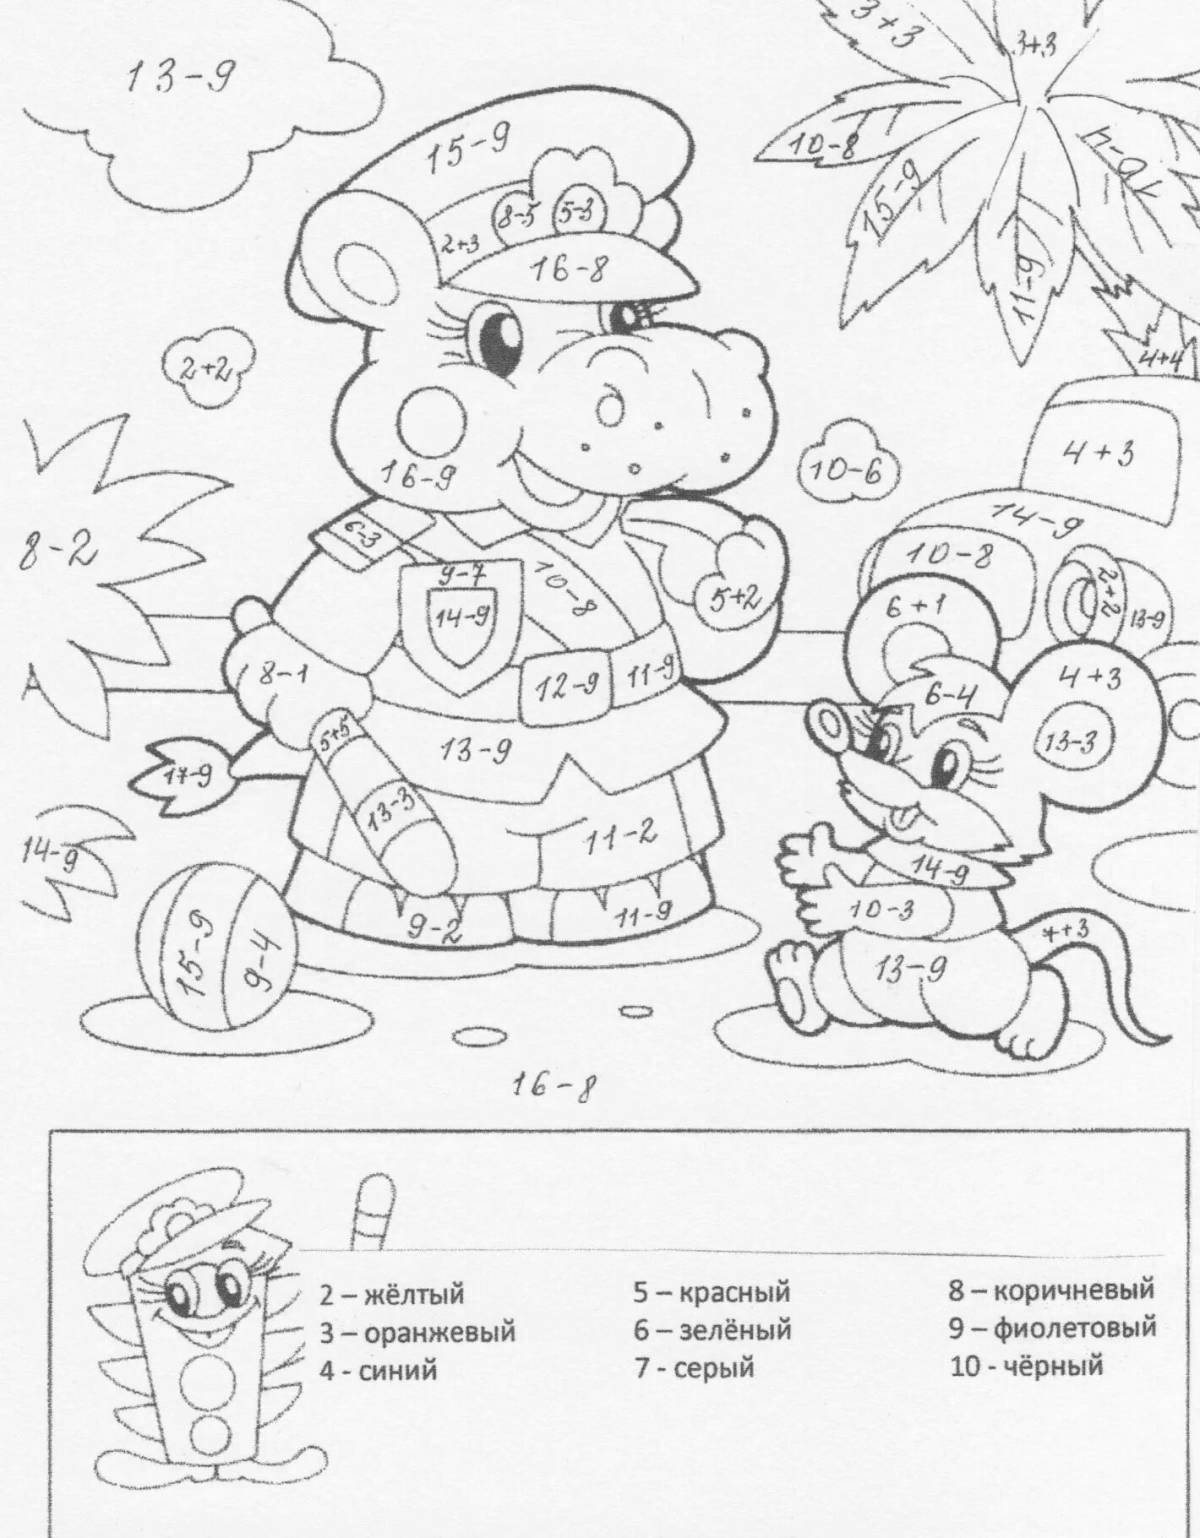 Exciting coloring page score within 10 simulator 1 class